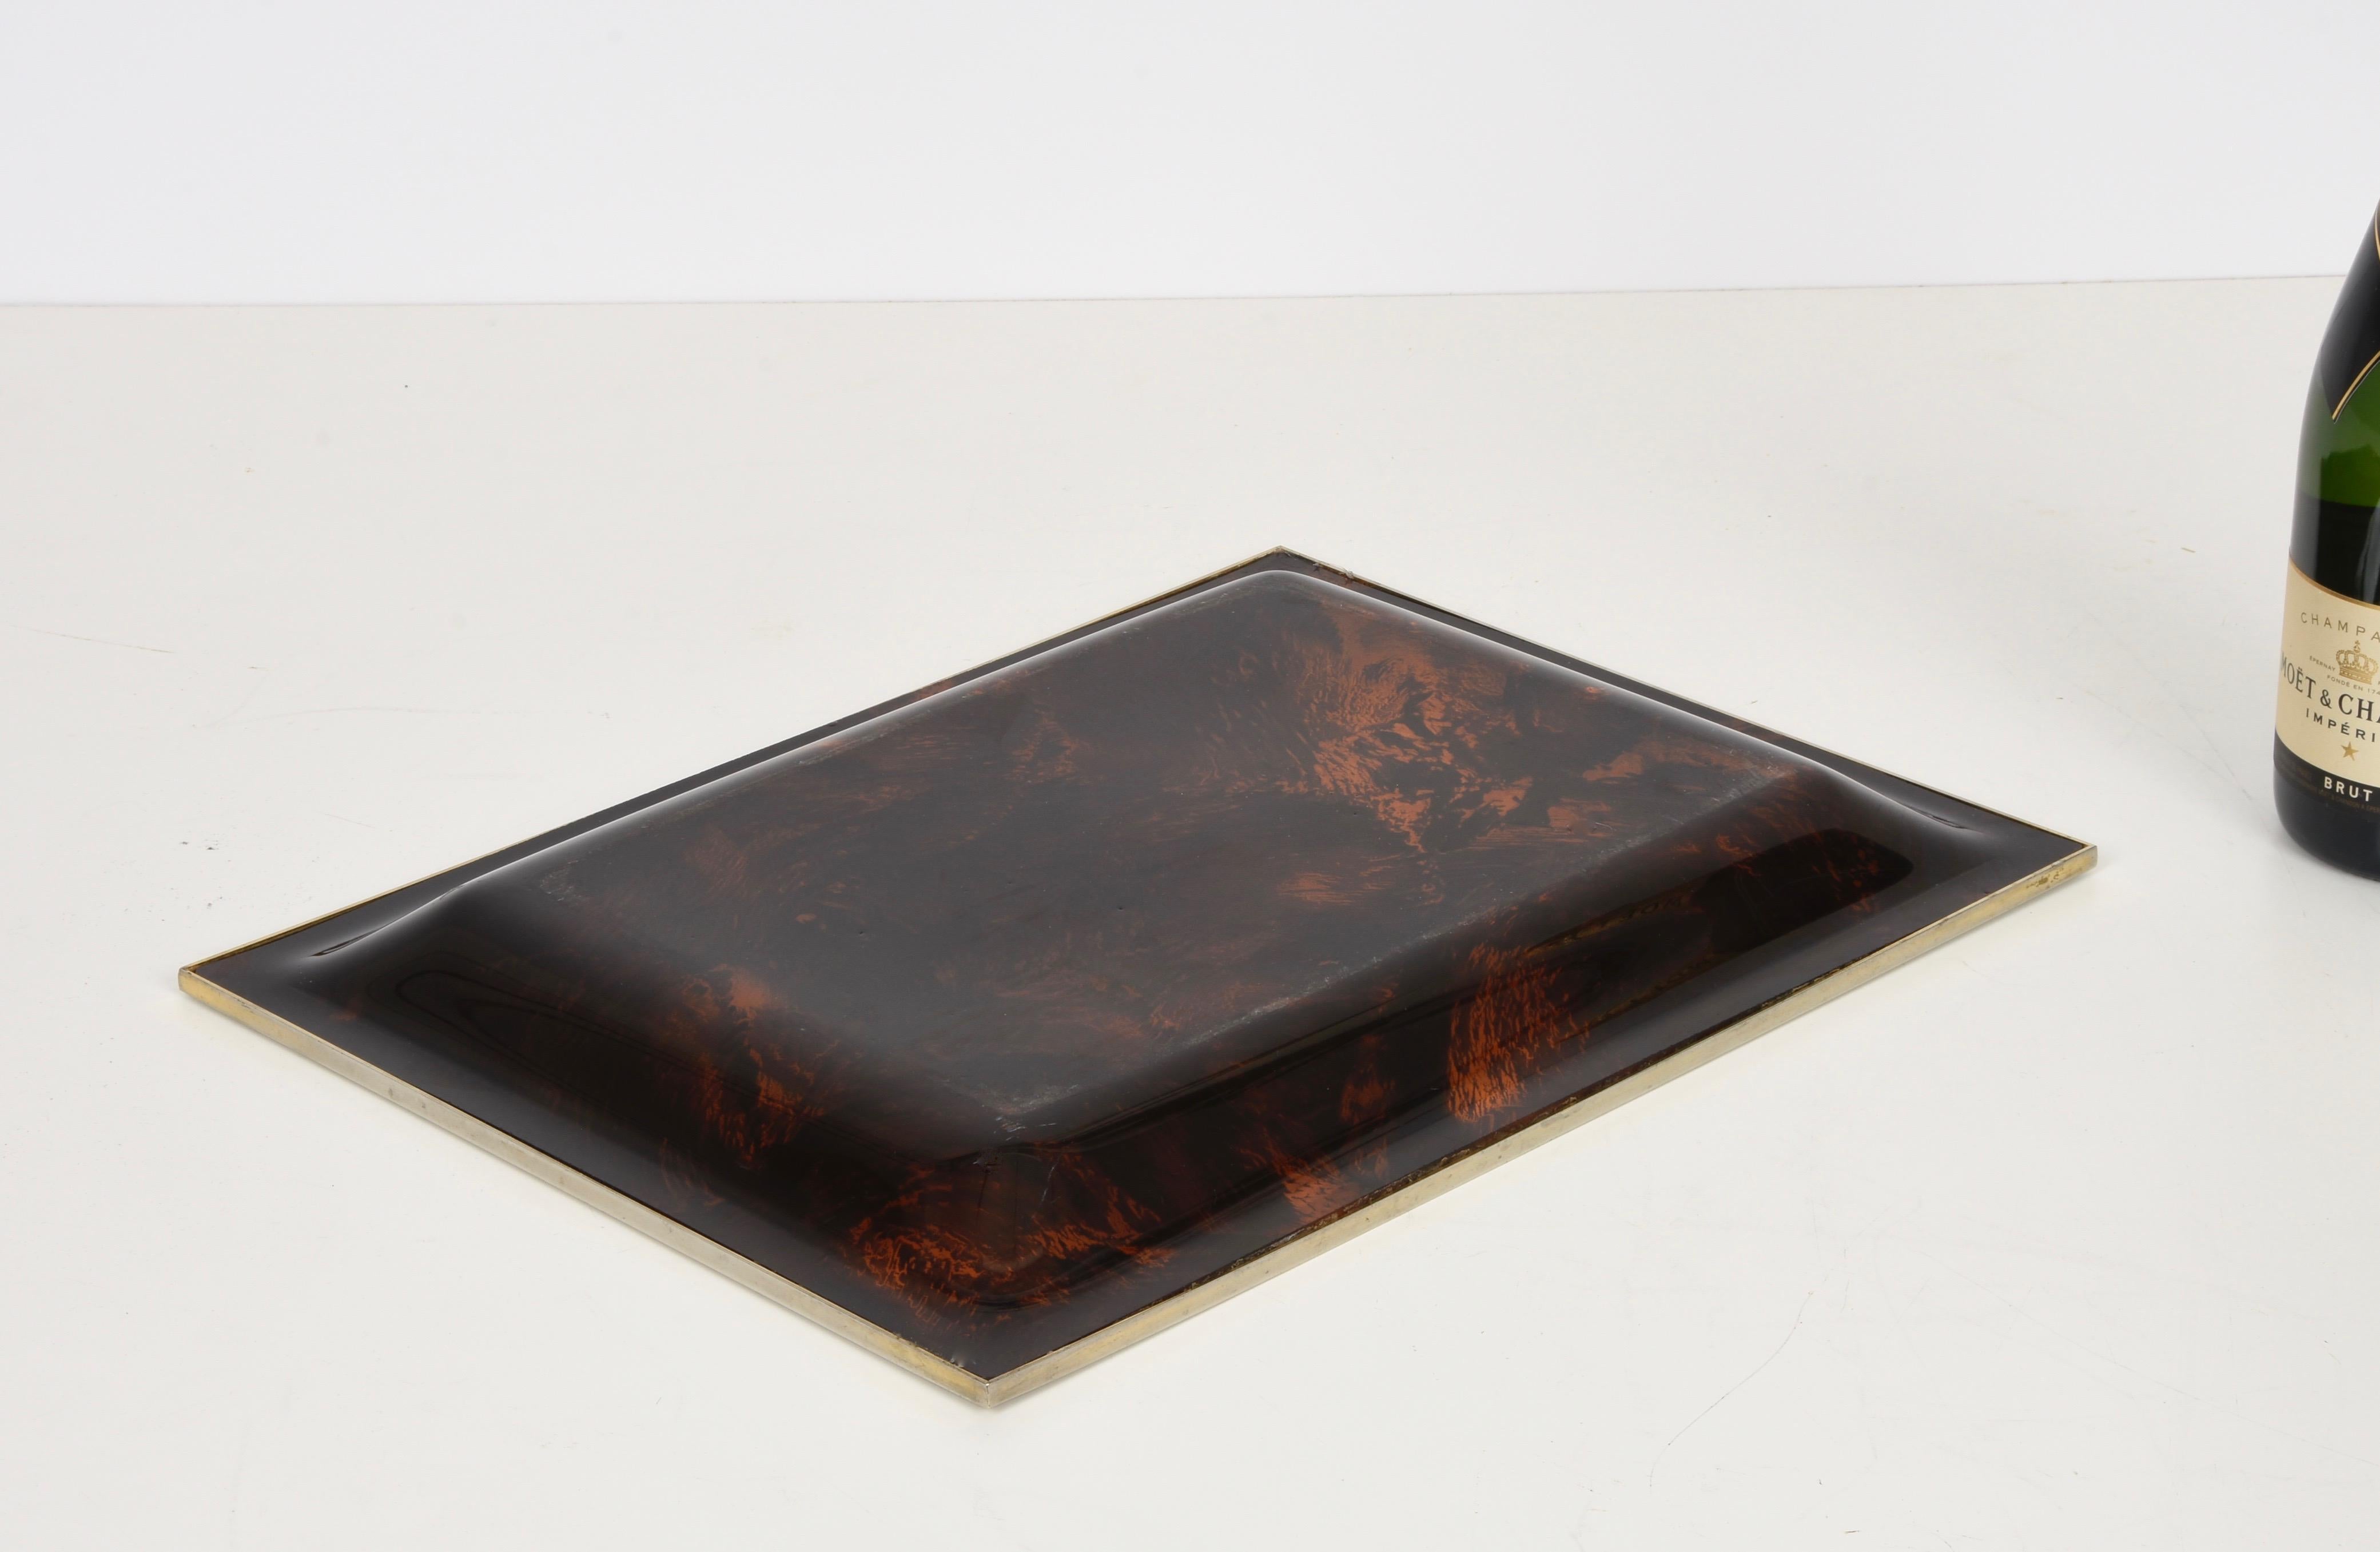 Metal Midcentury Tortoiseshell Plexiglass Italian Serving Tray after Willy Rizzo 1970s For Sale